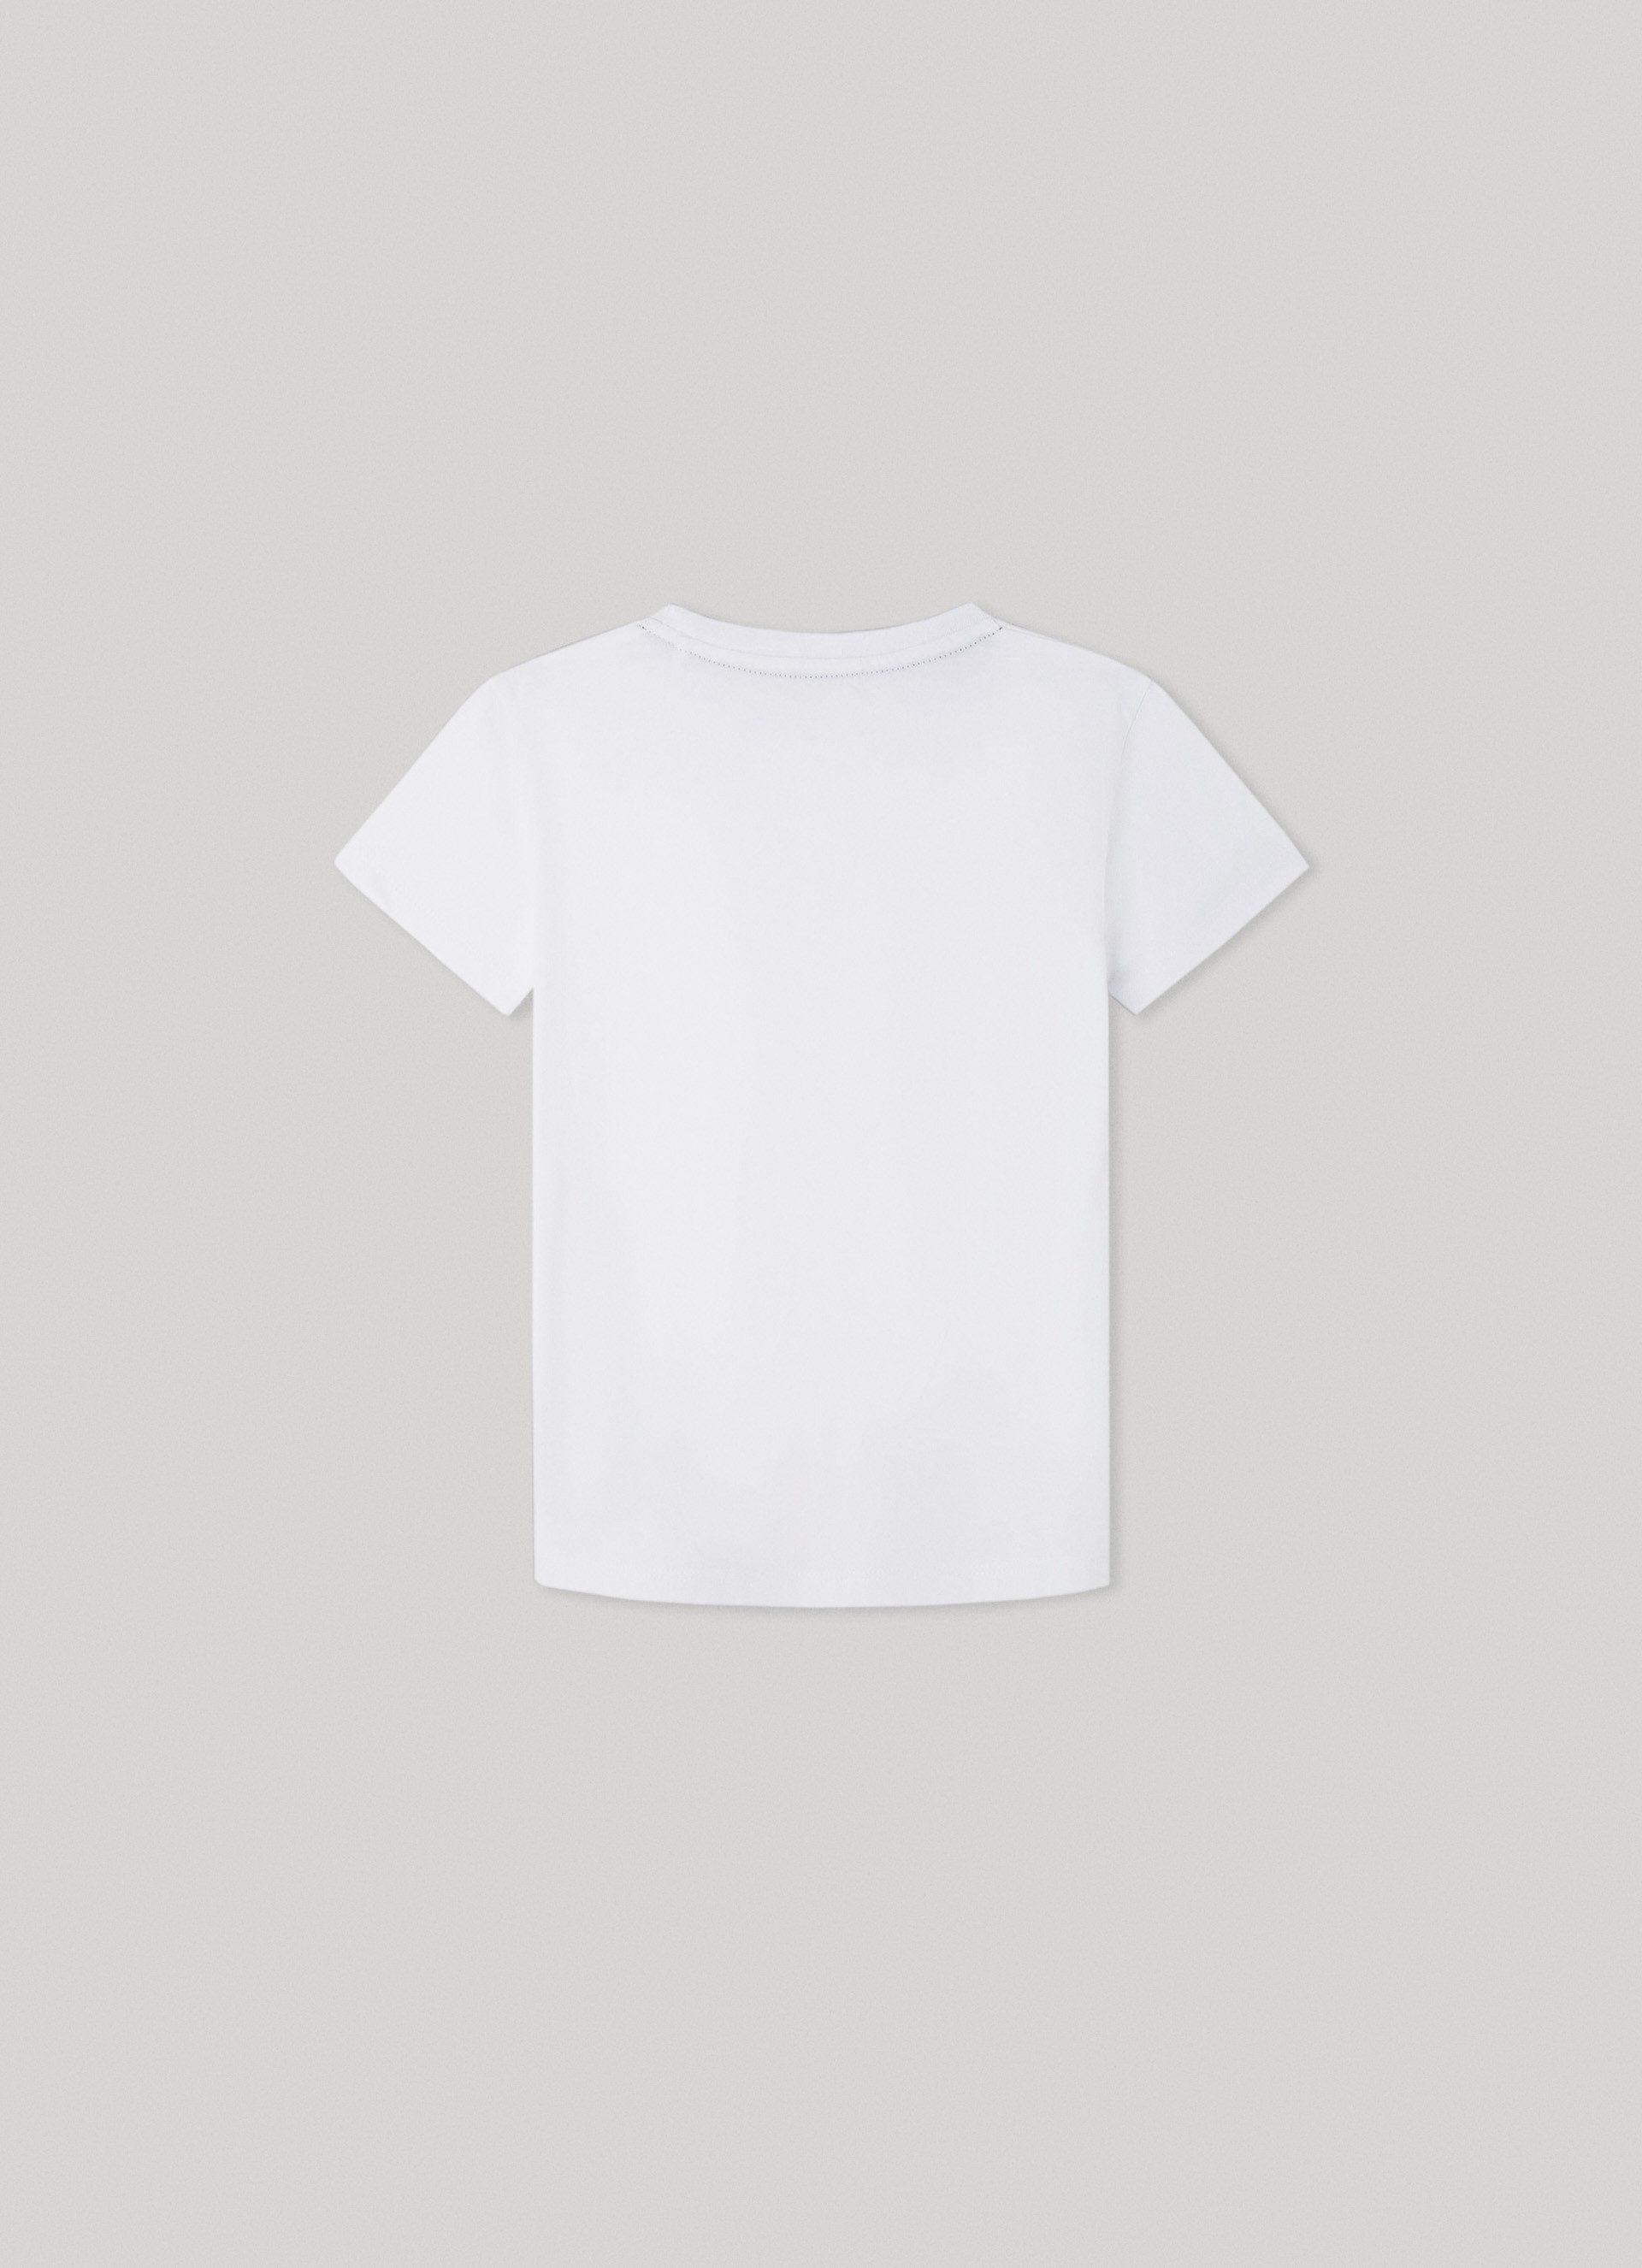 Pepe Jeans T-shirt Rbovent for boys